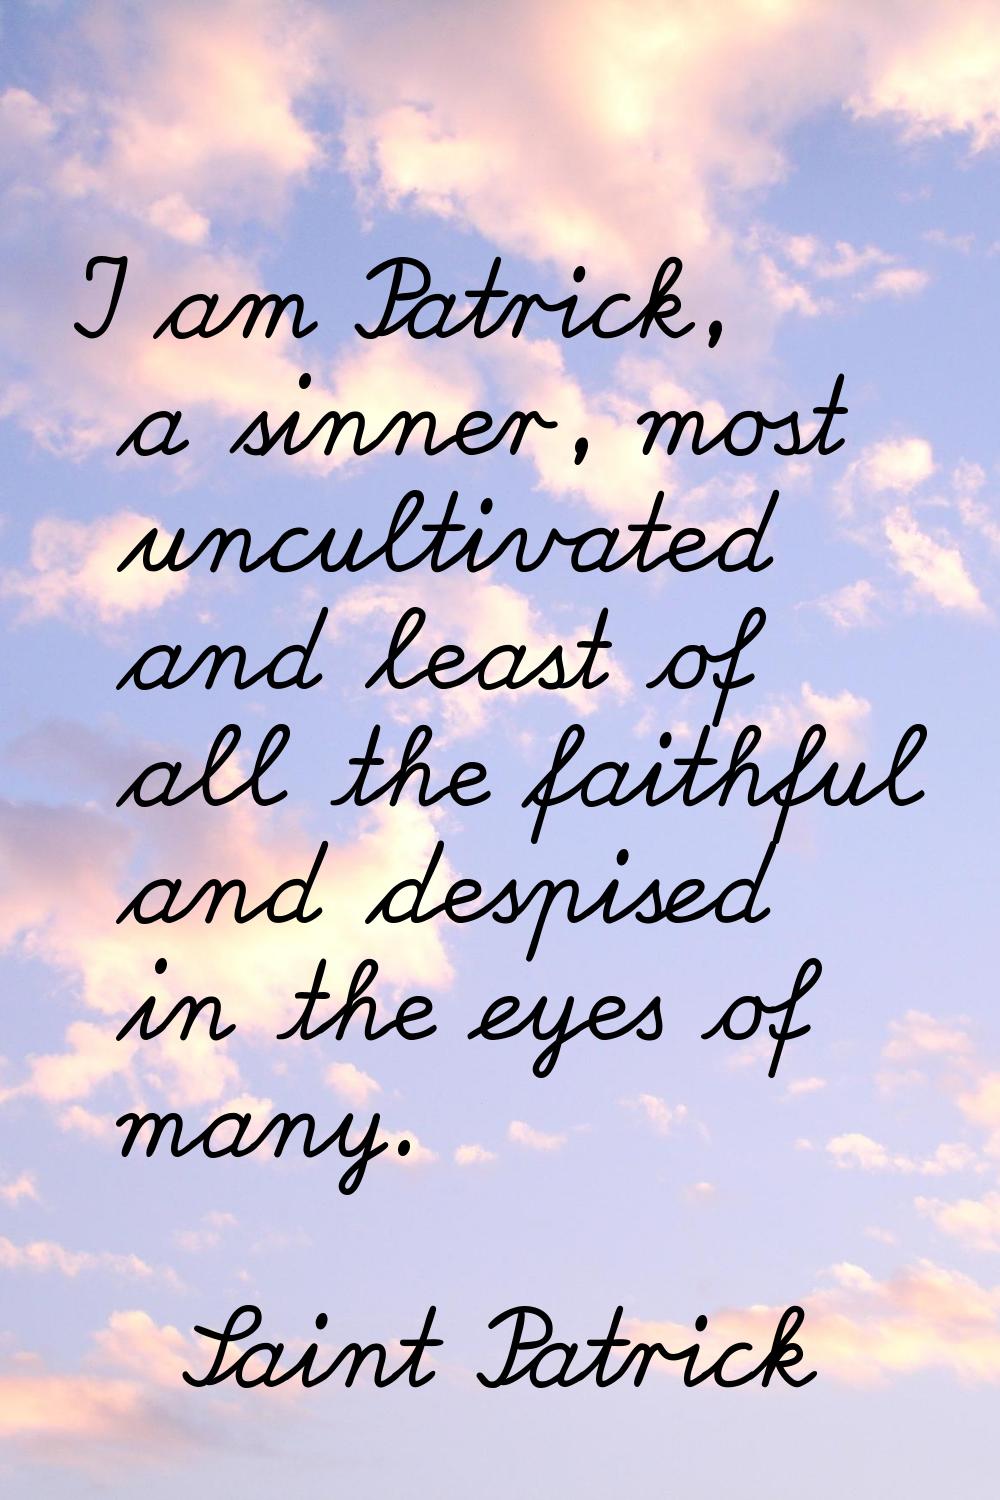 I am Patrick, a sinner, most uncultivated and least of all the faithful and despised in the eyes of